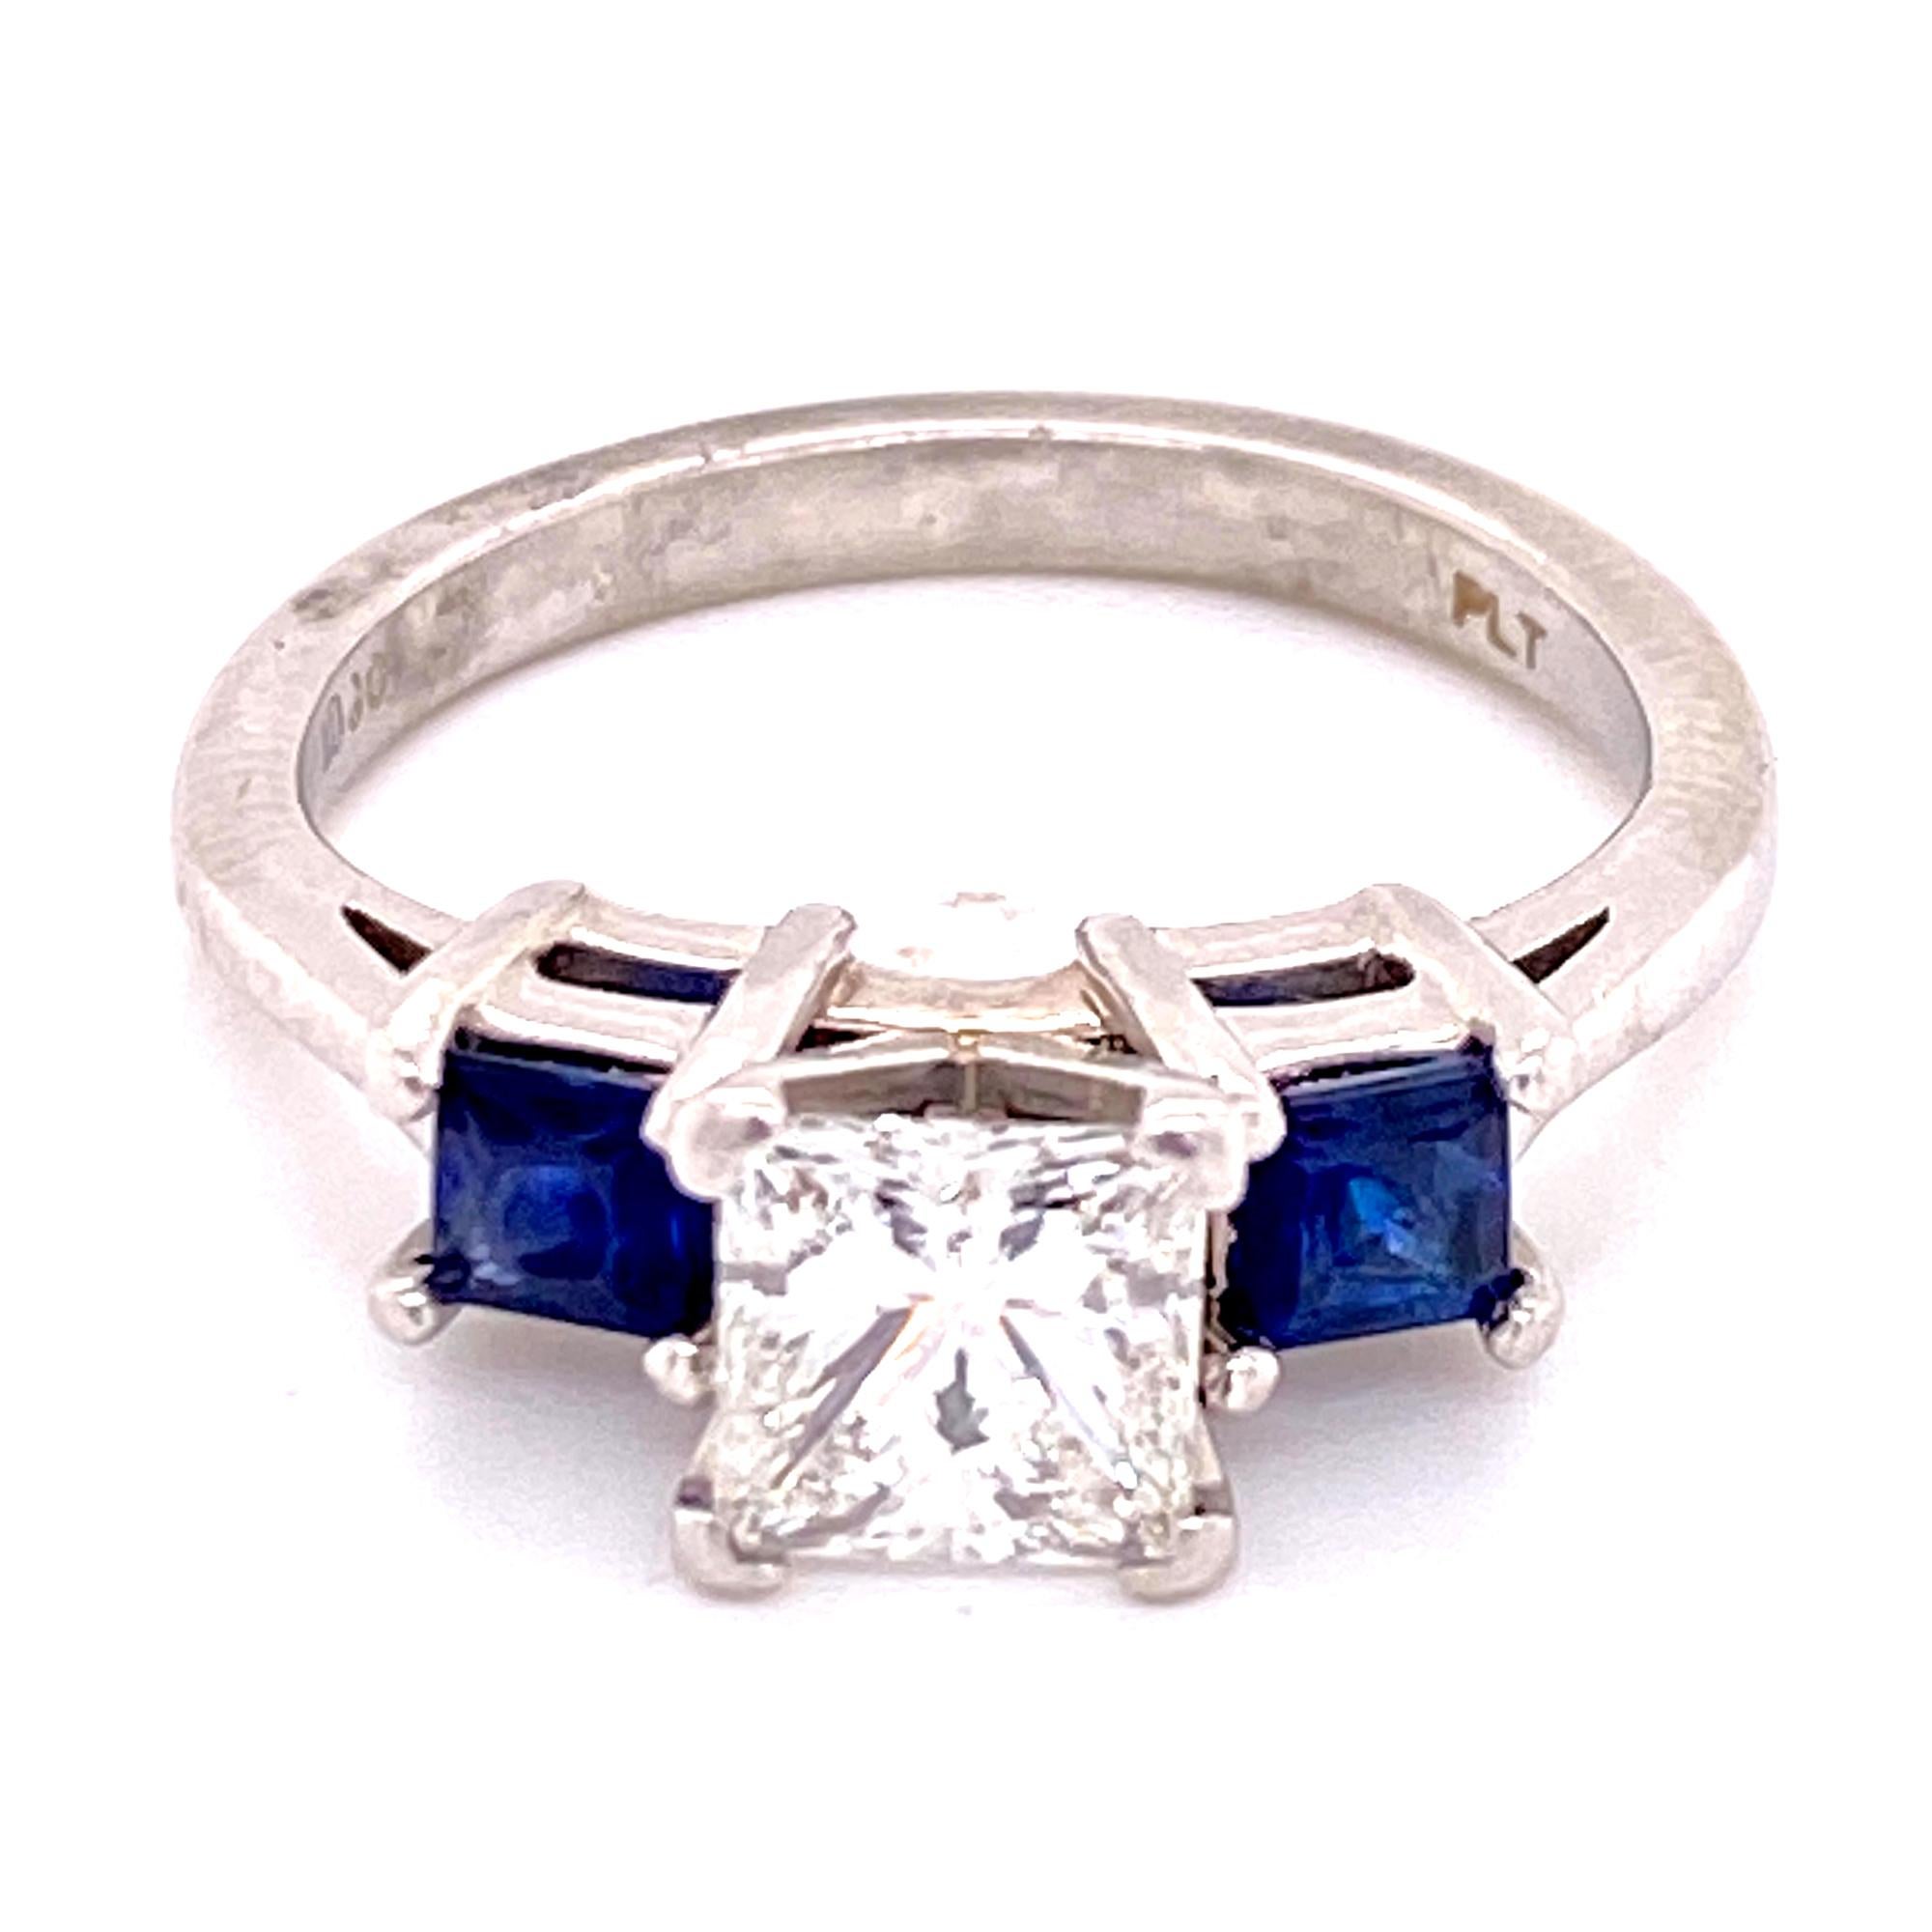 Beautiful three stone diamond and sapphire ring is handcrafted in platinum. The 1.02 princess cut diamond is GIA certified and graded G color and VS2 clarity. The center diamond is set between two beautiful blue princess cut natural sapphires